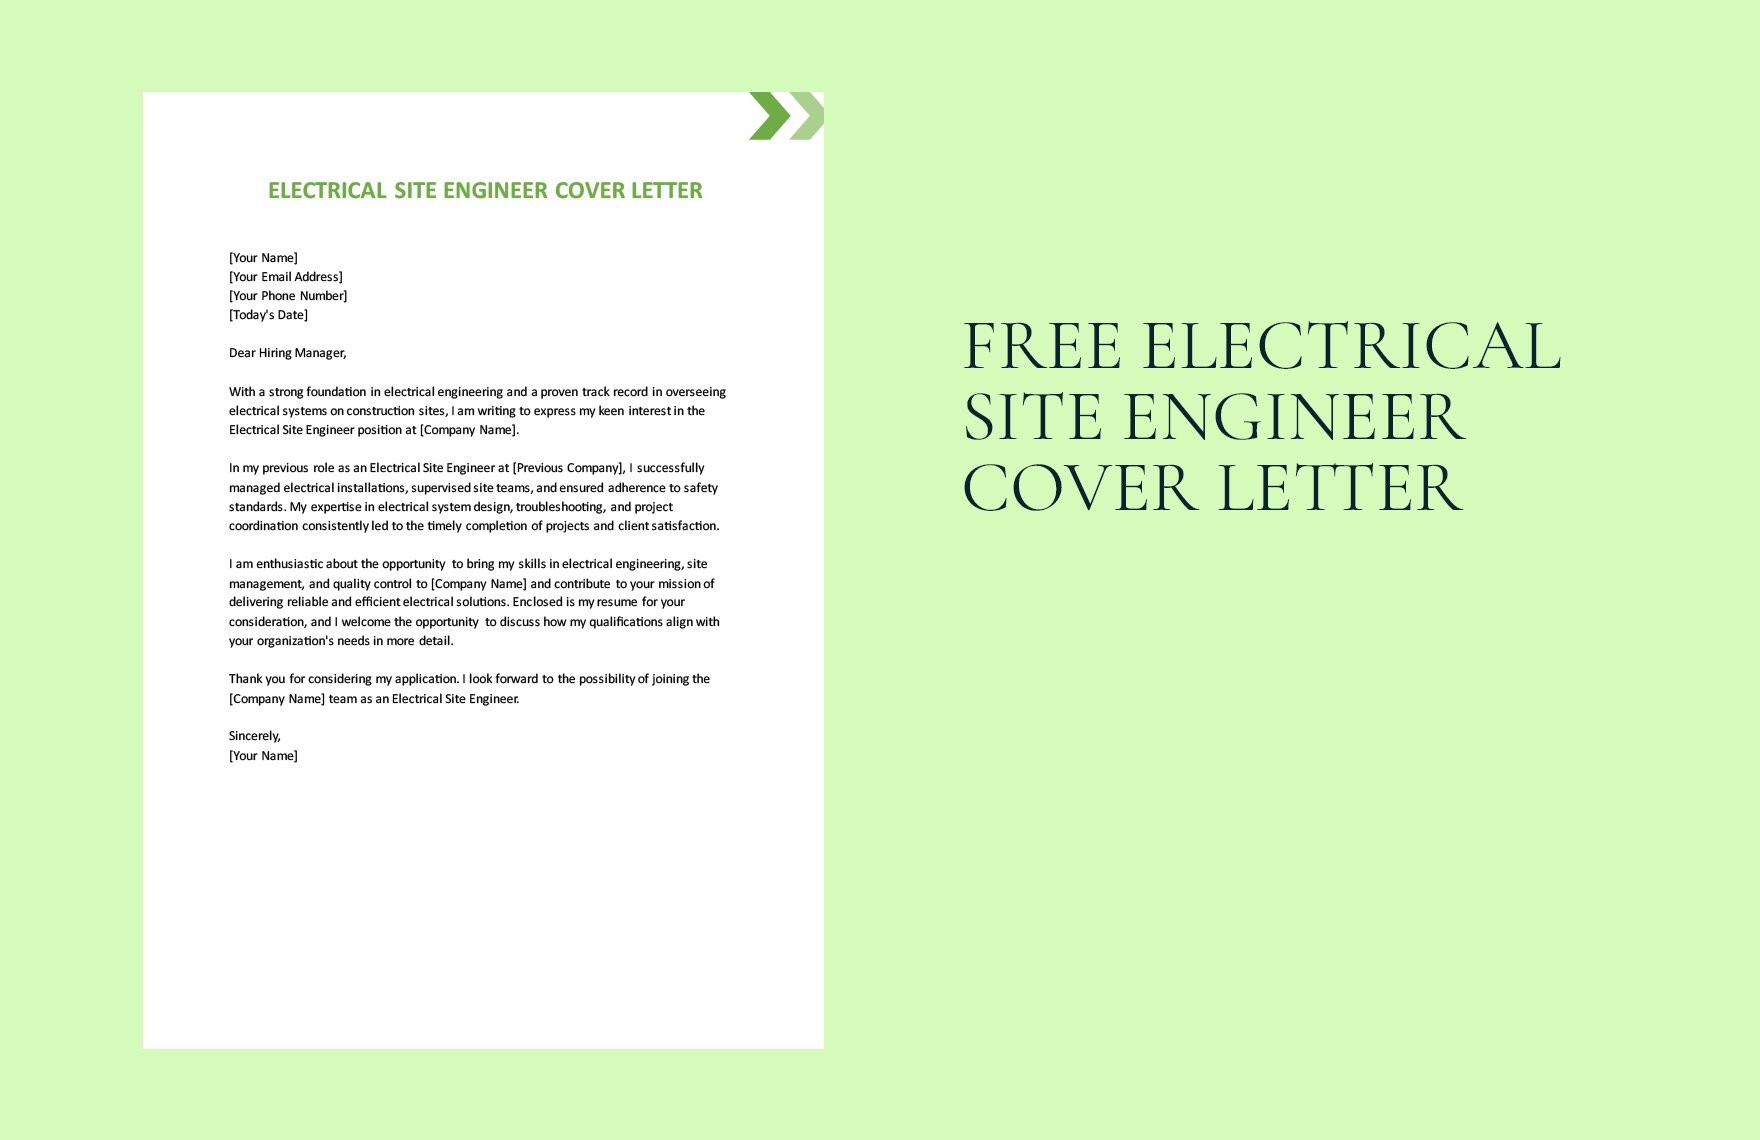 Electrical Site Engineer Cover Letter in Word, Google Docs, PDF